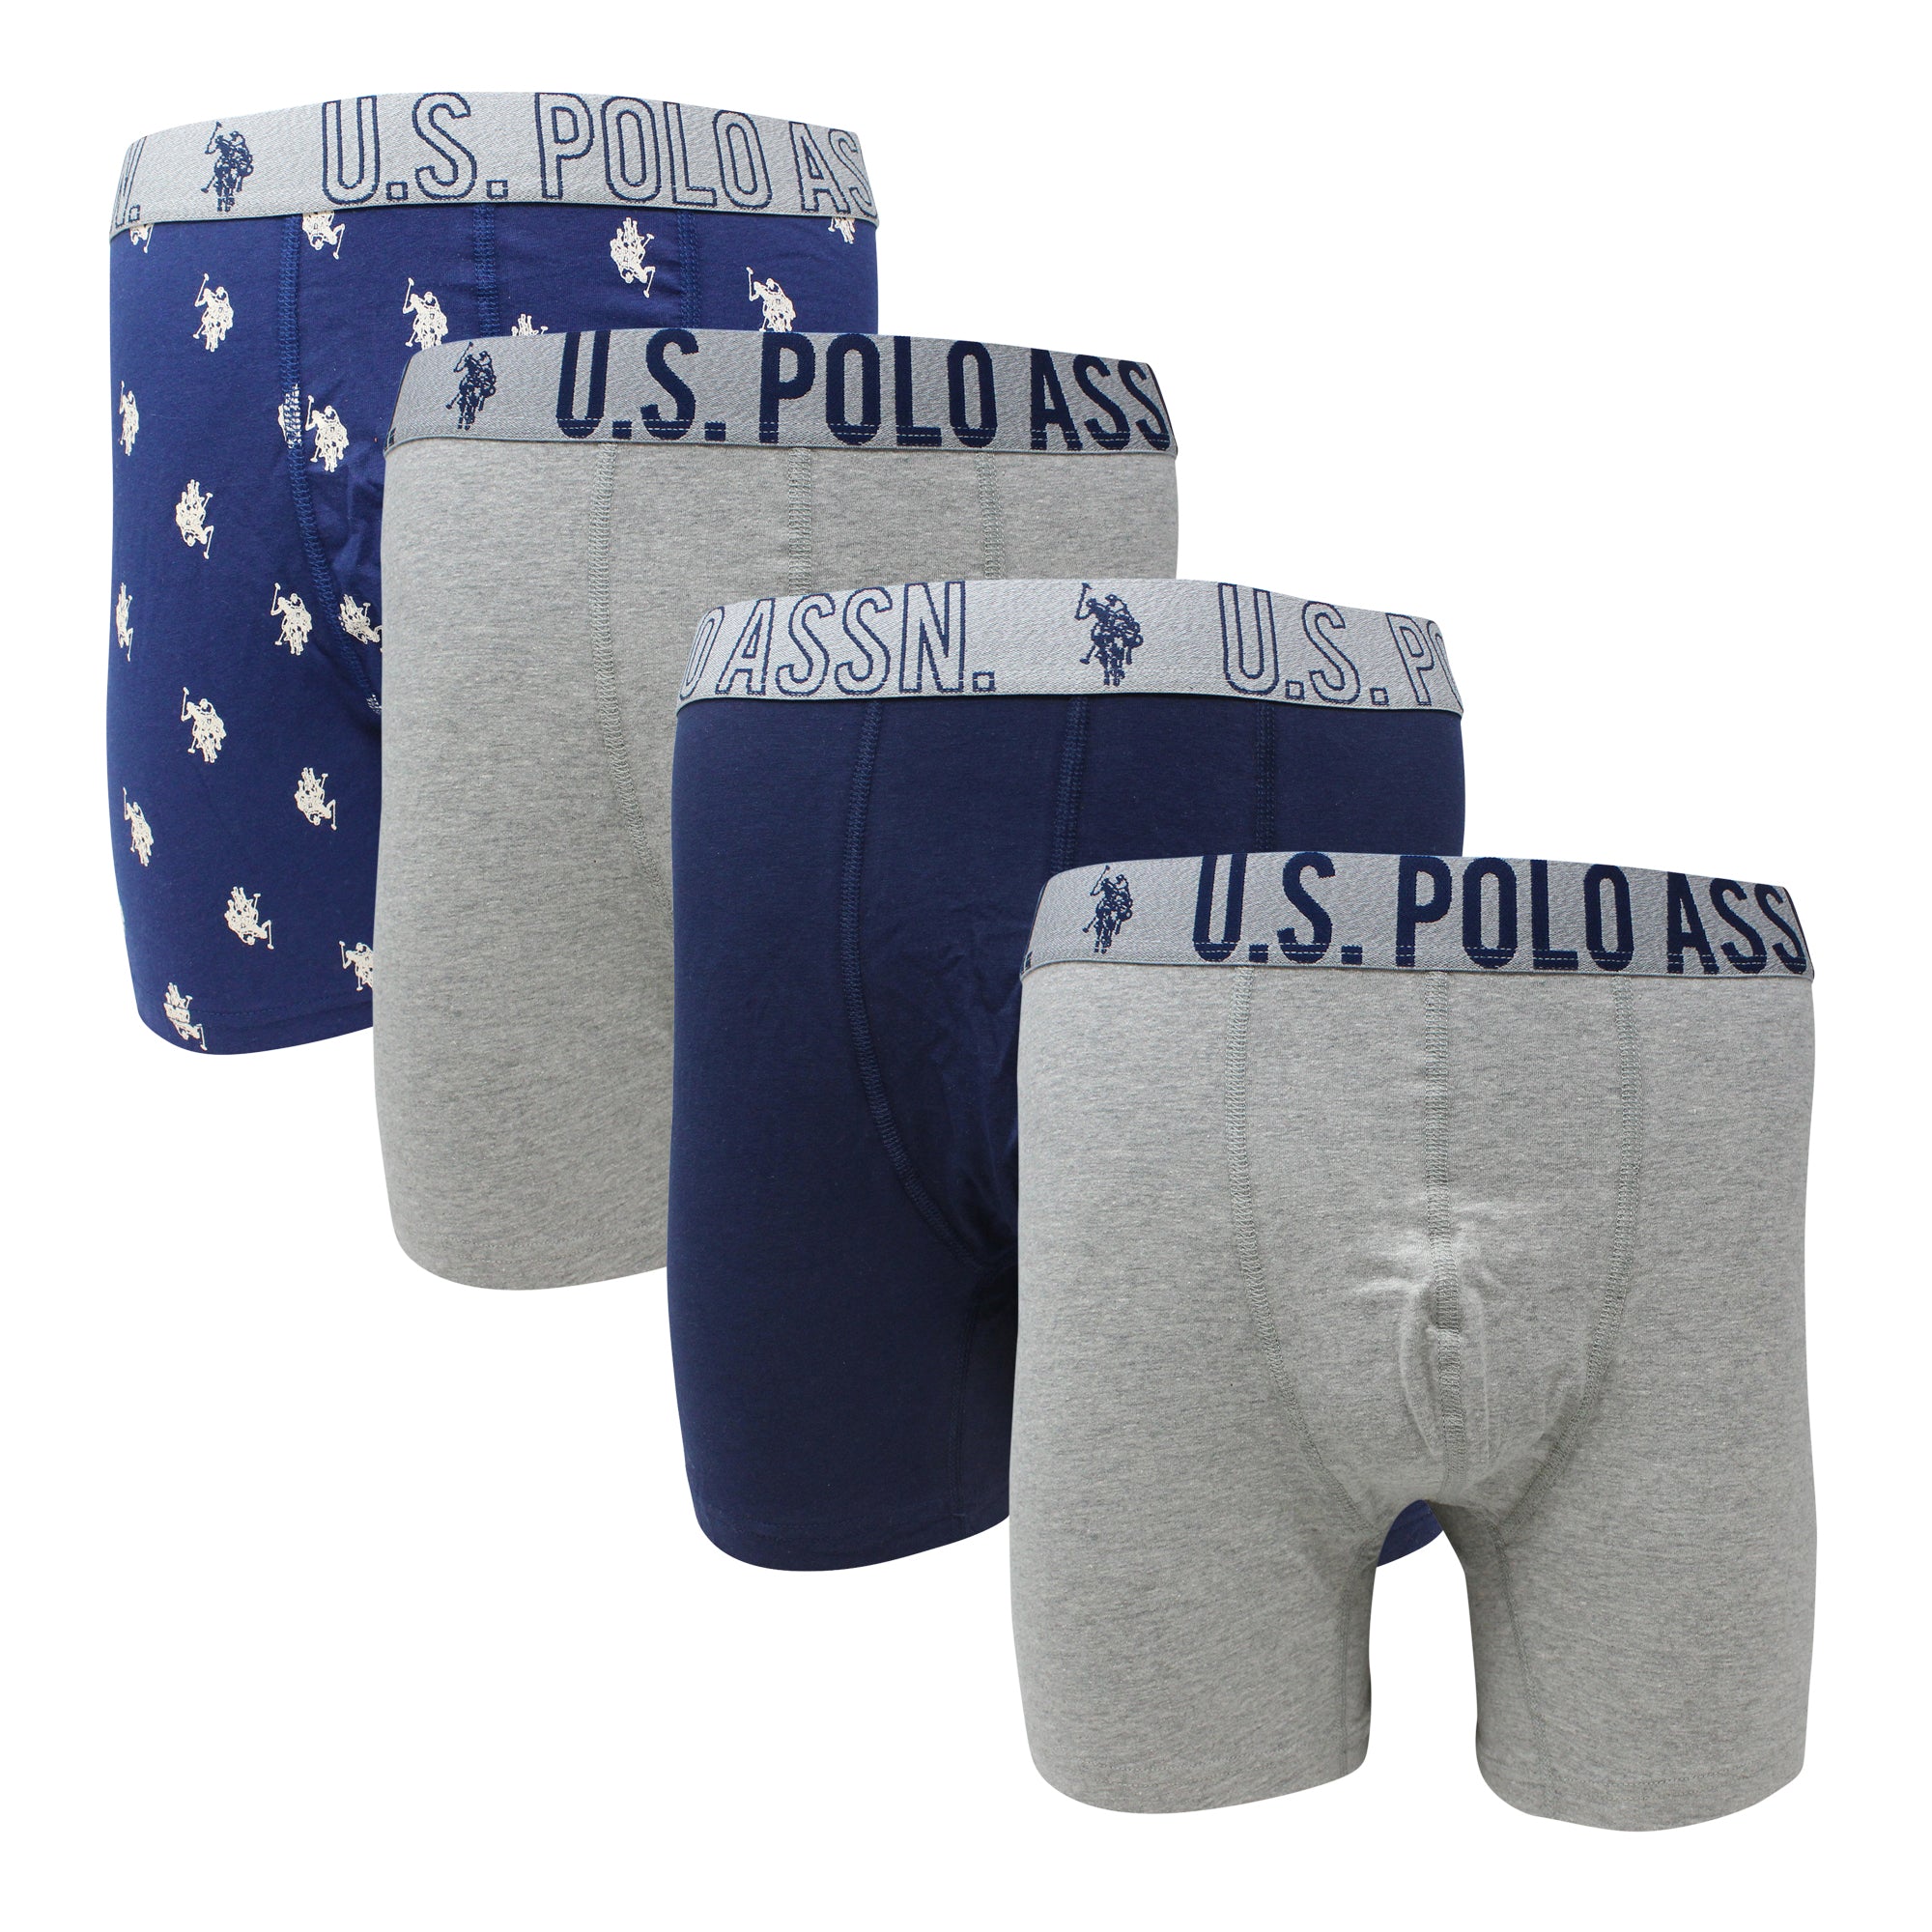 U.S. Polo Assn. Men's 3-Pack Cotton Boxer Briefs, Heather Grey/Black, Small  at  Men's Clothing store